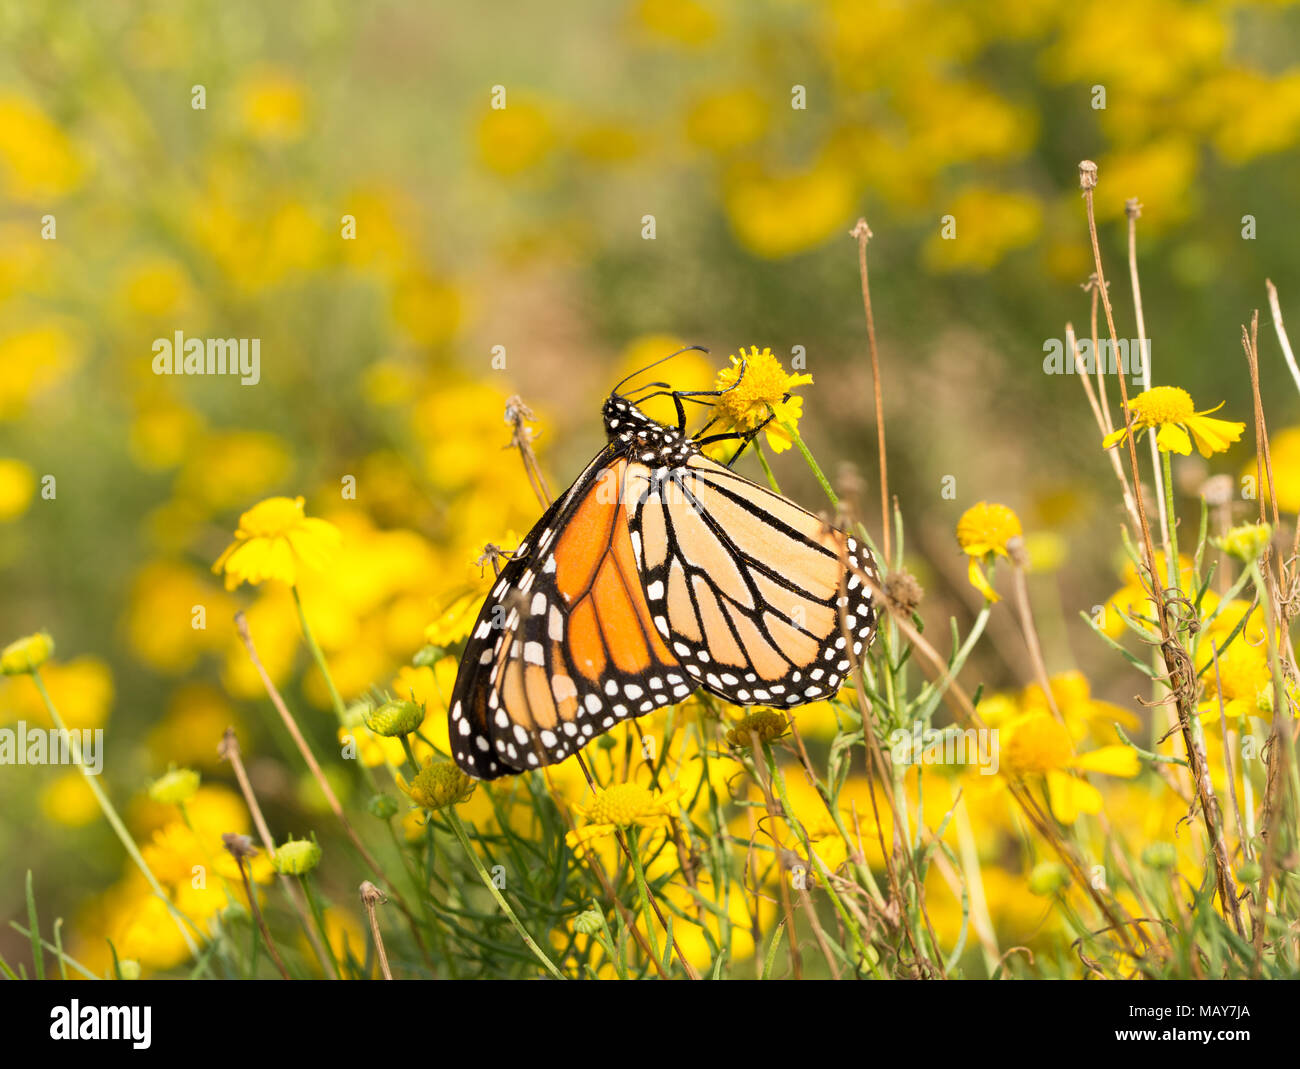 Female Monarch butterfly feeding on a yellow Sneezeweed flower to get energy for her migration in fall Stock Photo